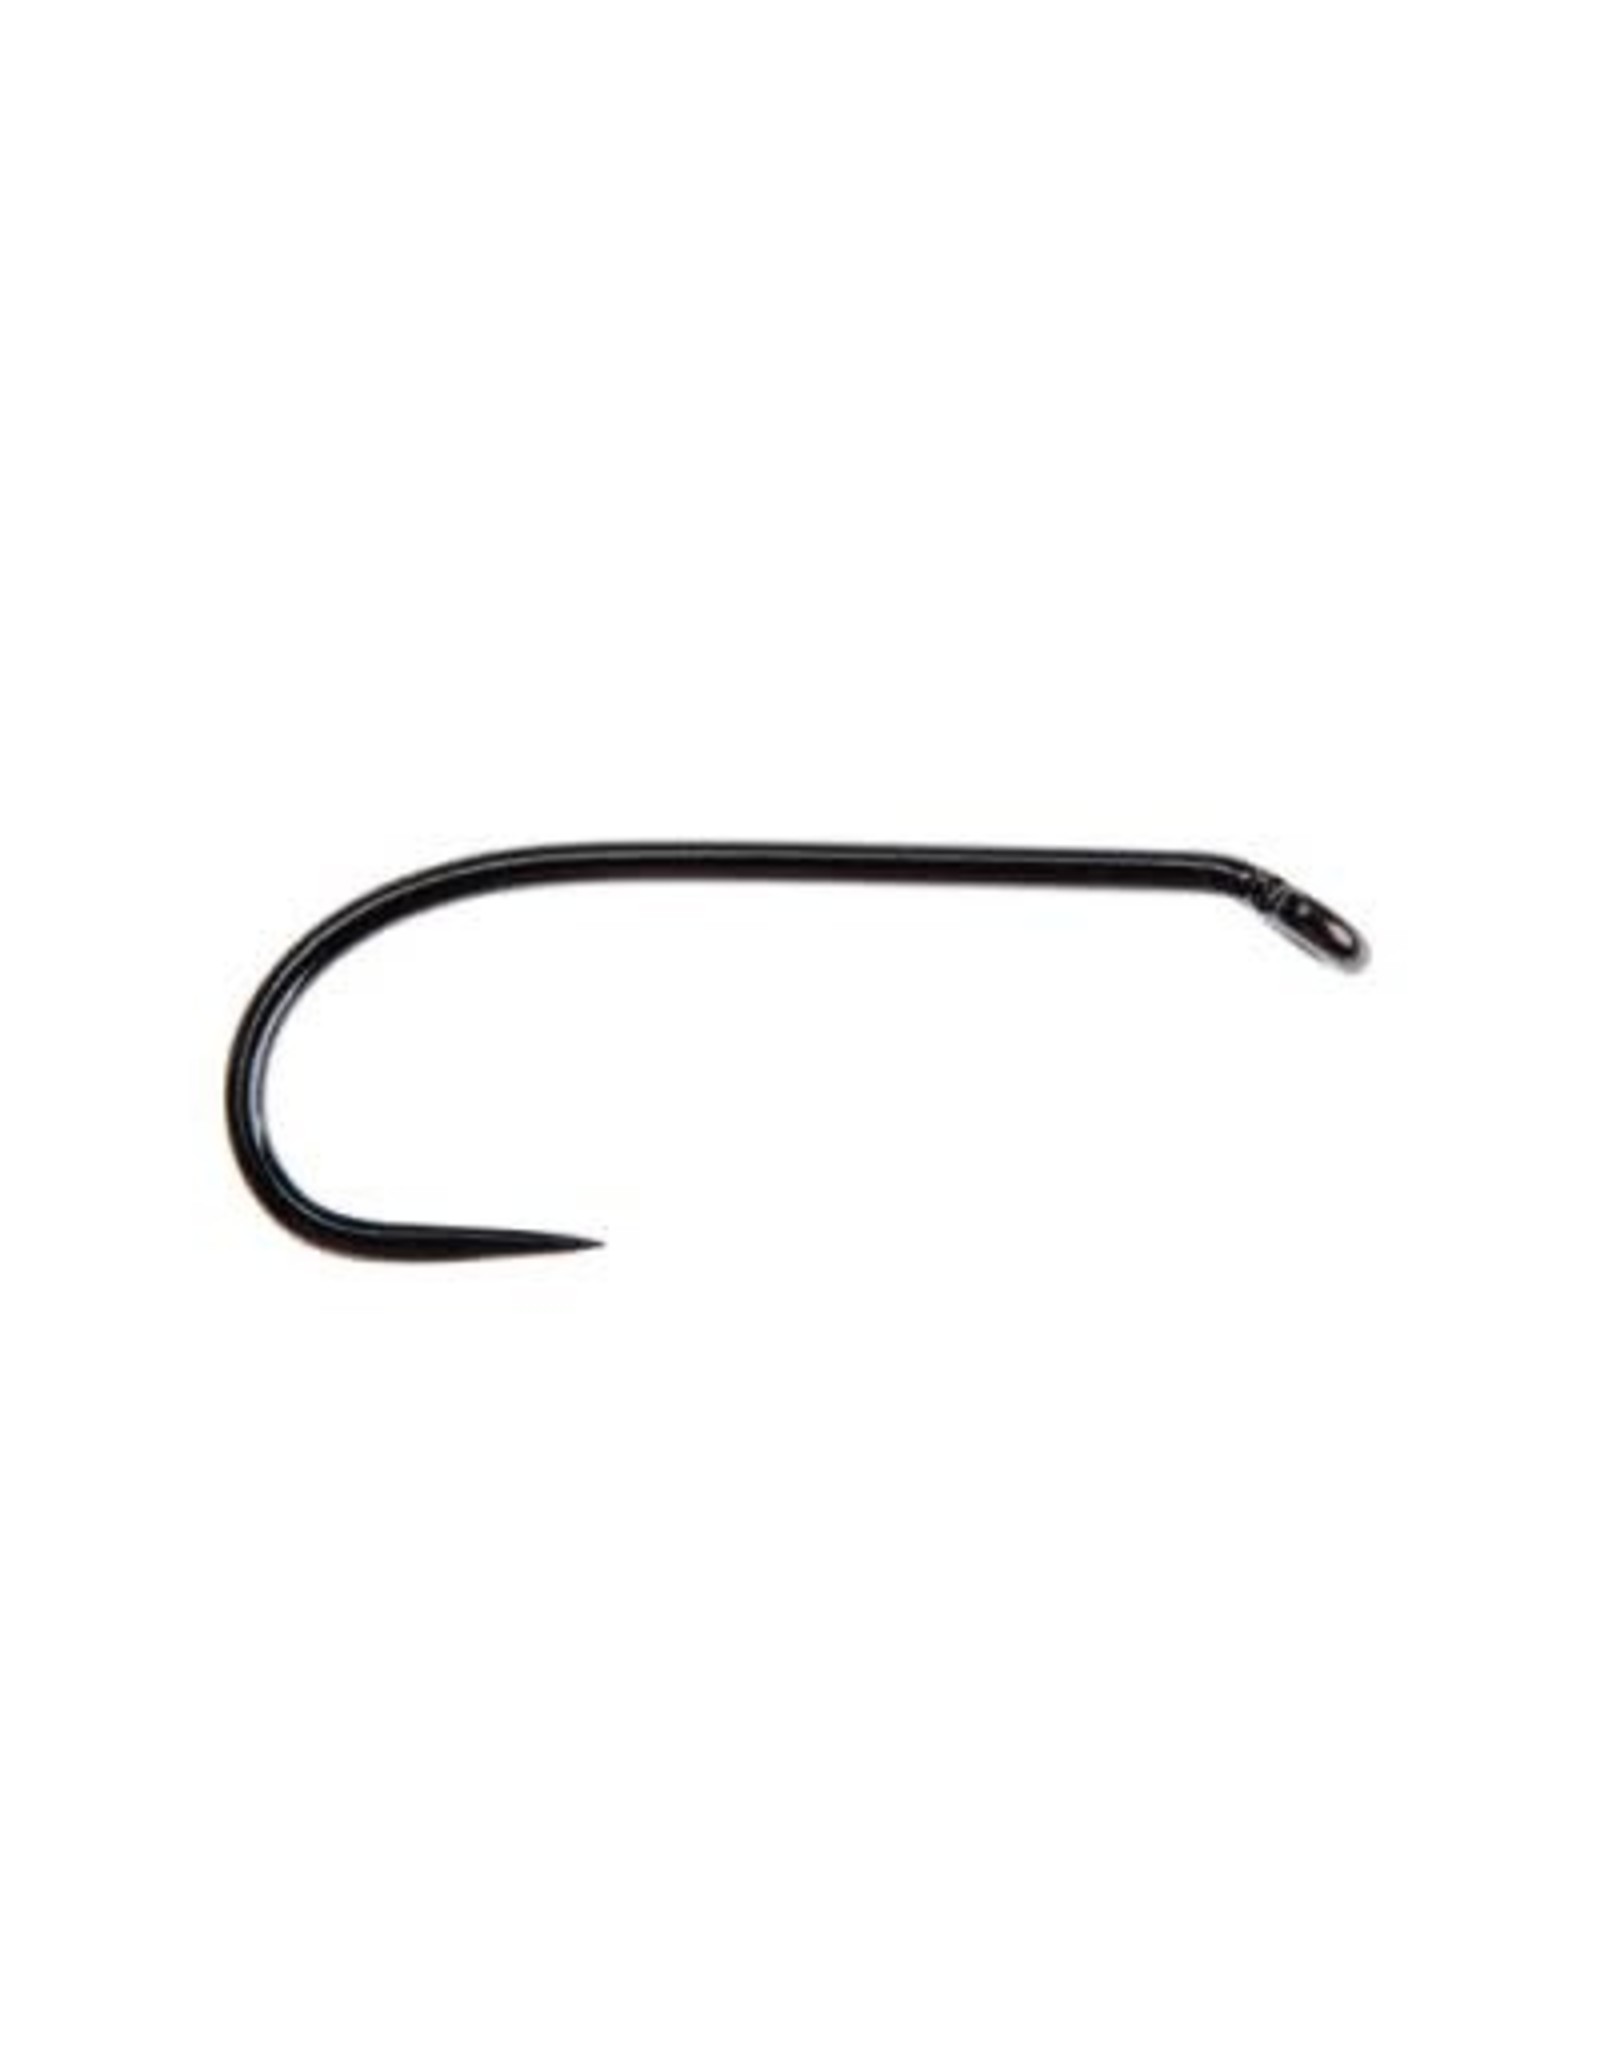 Ahrex Hooks AHREX FW561 #14 Nymph Traditional Barbless